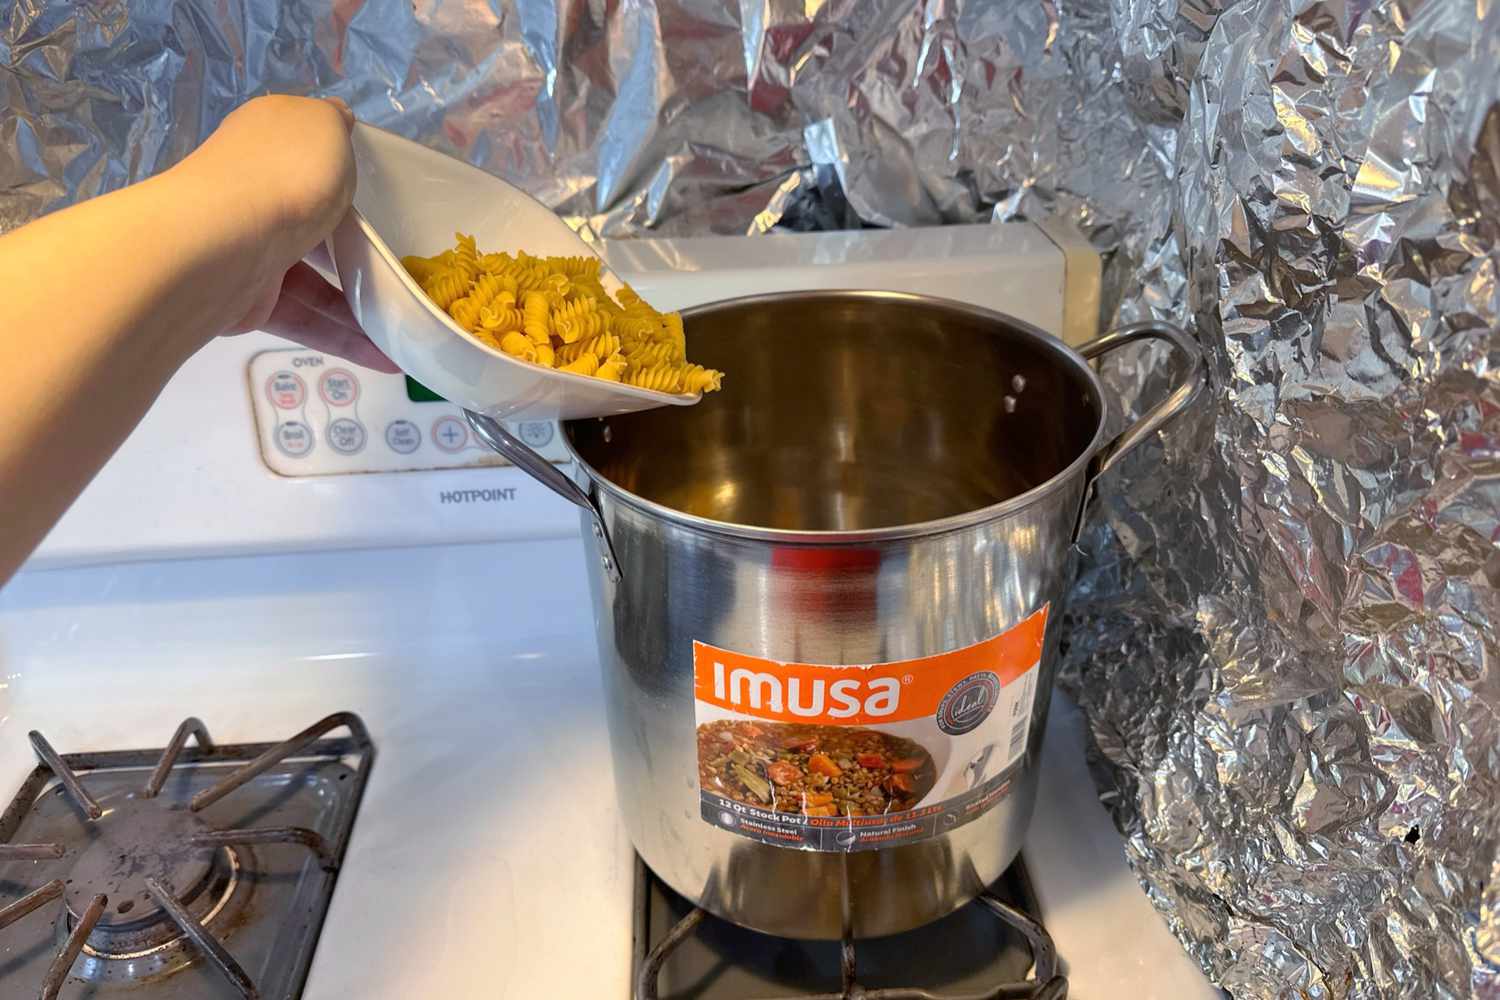 Dry pasta is poured into the IMUSA USA Stainless Steel Stock Pot, 12 Quart